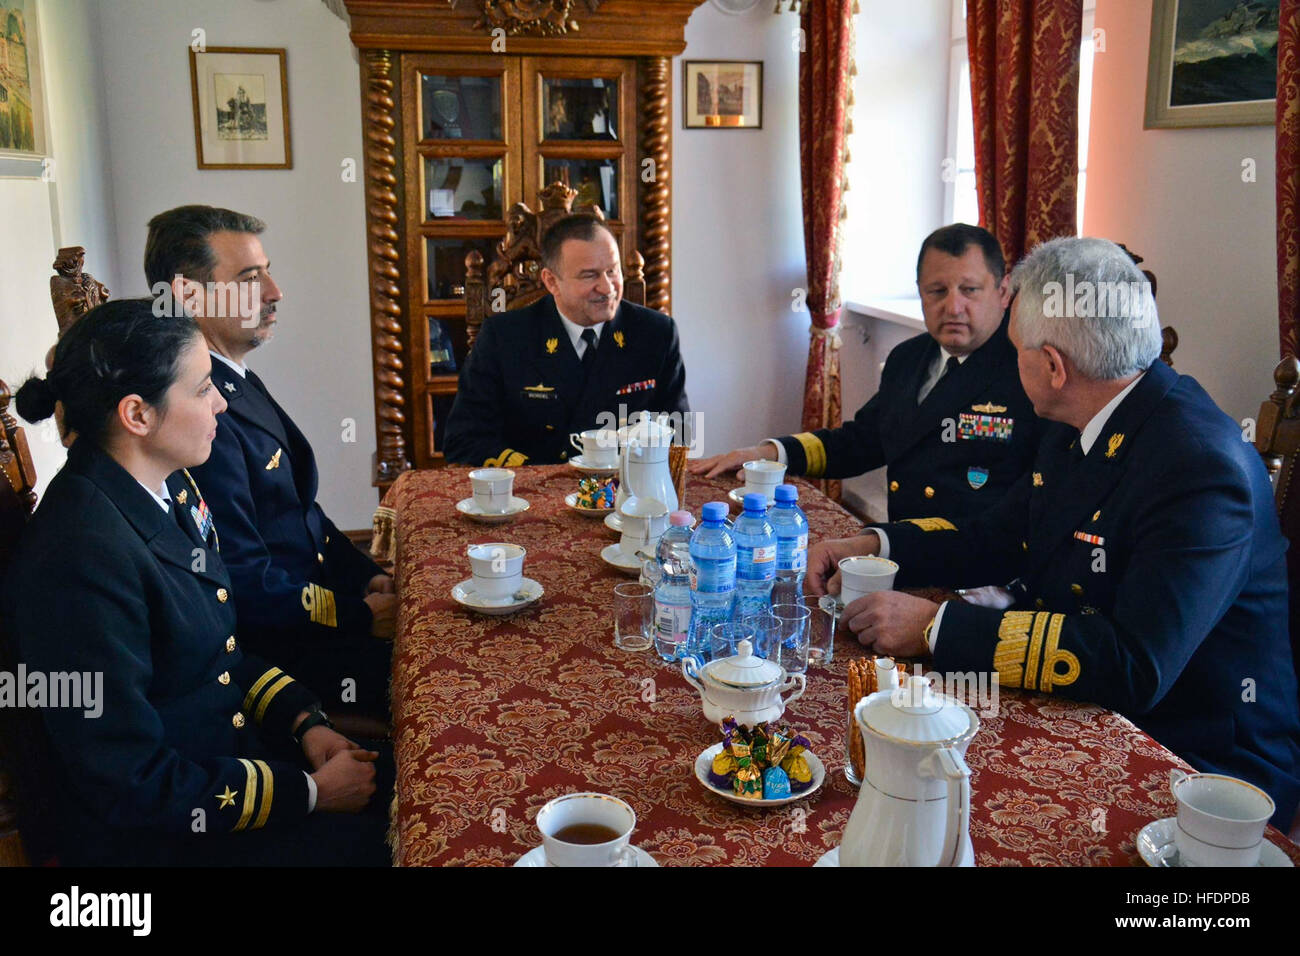 150605-N-IY633-020 GDYNIA, Poland (June 5, 2015) – Standing NATO Maritime Group 2 (SNMG2) and Polish armed forces leadership meet during SNMG2’s port visit to the city in preparation for exercise Baltic Operations (BALTOPS). BALTOPS is an annually reoccurring multinational exercise designed to enhance flexibility and interoperability, as well as demonstrate resolve of Allied and partner forces to defend the Baltic region. (U.S. Navy photo by Mass Communication Specialist 2nd Class Amanda S. Kitchner/Released) BALTOPS 150605-N-IY633-020 Stock Photo